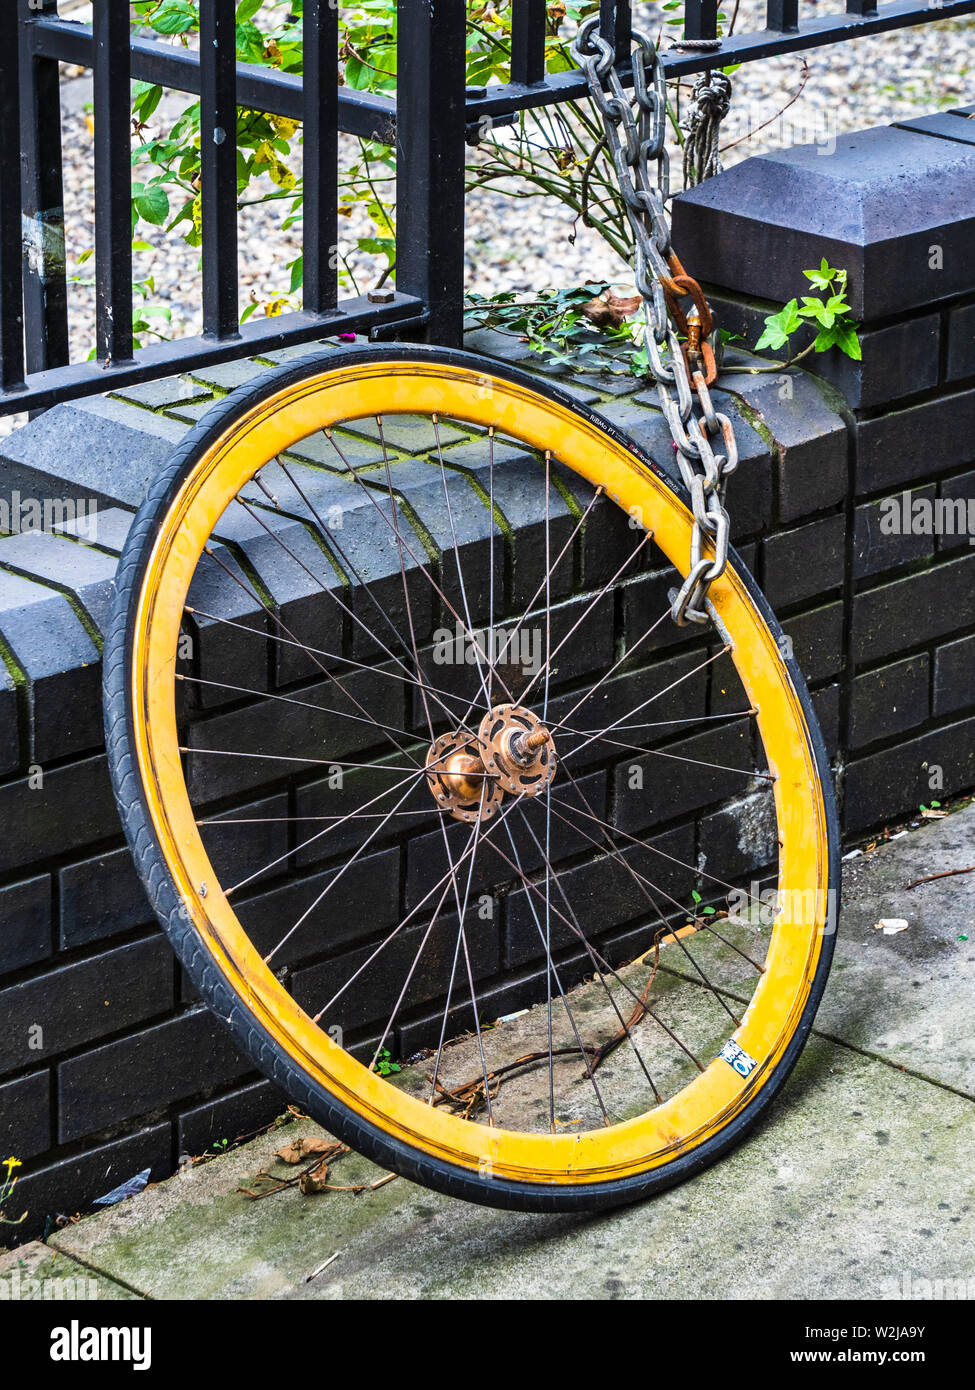 Bike wheel from a stolen bike - only the front wheel was locked, the rest of the bike was easily stolen. Stock Photo